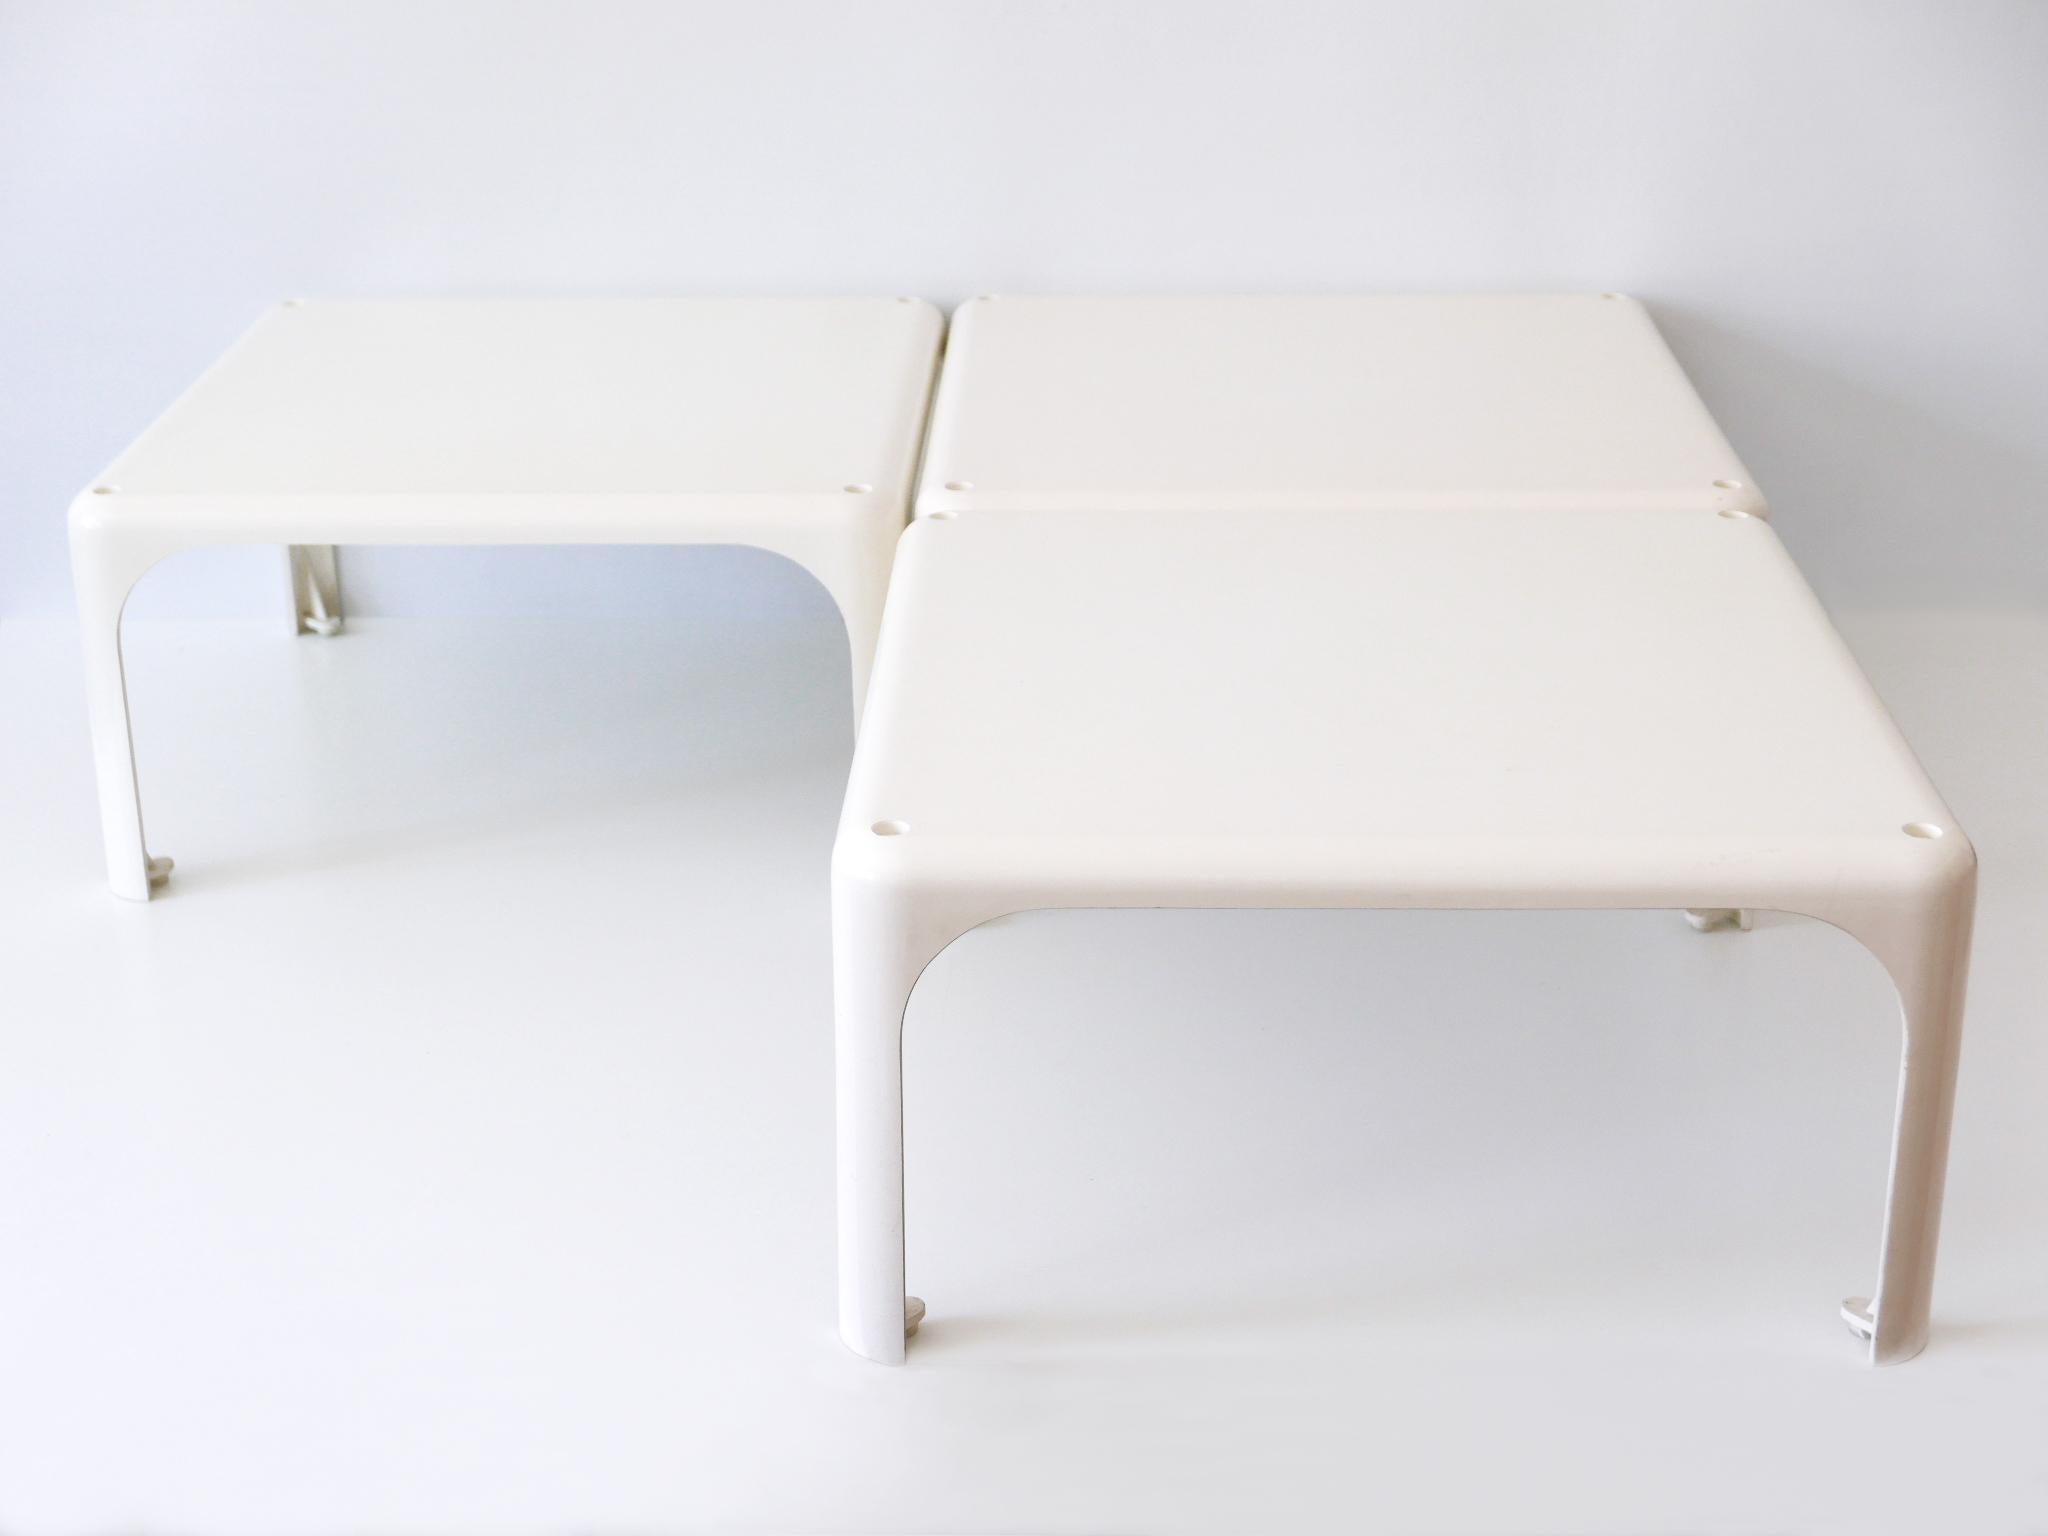 Set of three Mid-Century Modern low side tables 'Demetrio 45'. Designed by Vico Magistretti for Artemide, Italy, 1960s. Each item marked underside.

Executed in glossy molded white plastic.

Condition: 
Good original vintage condition. Wear